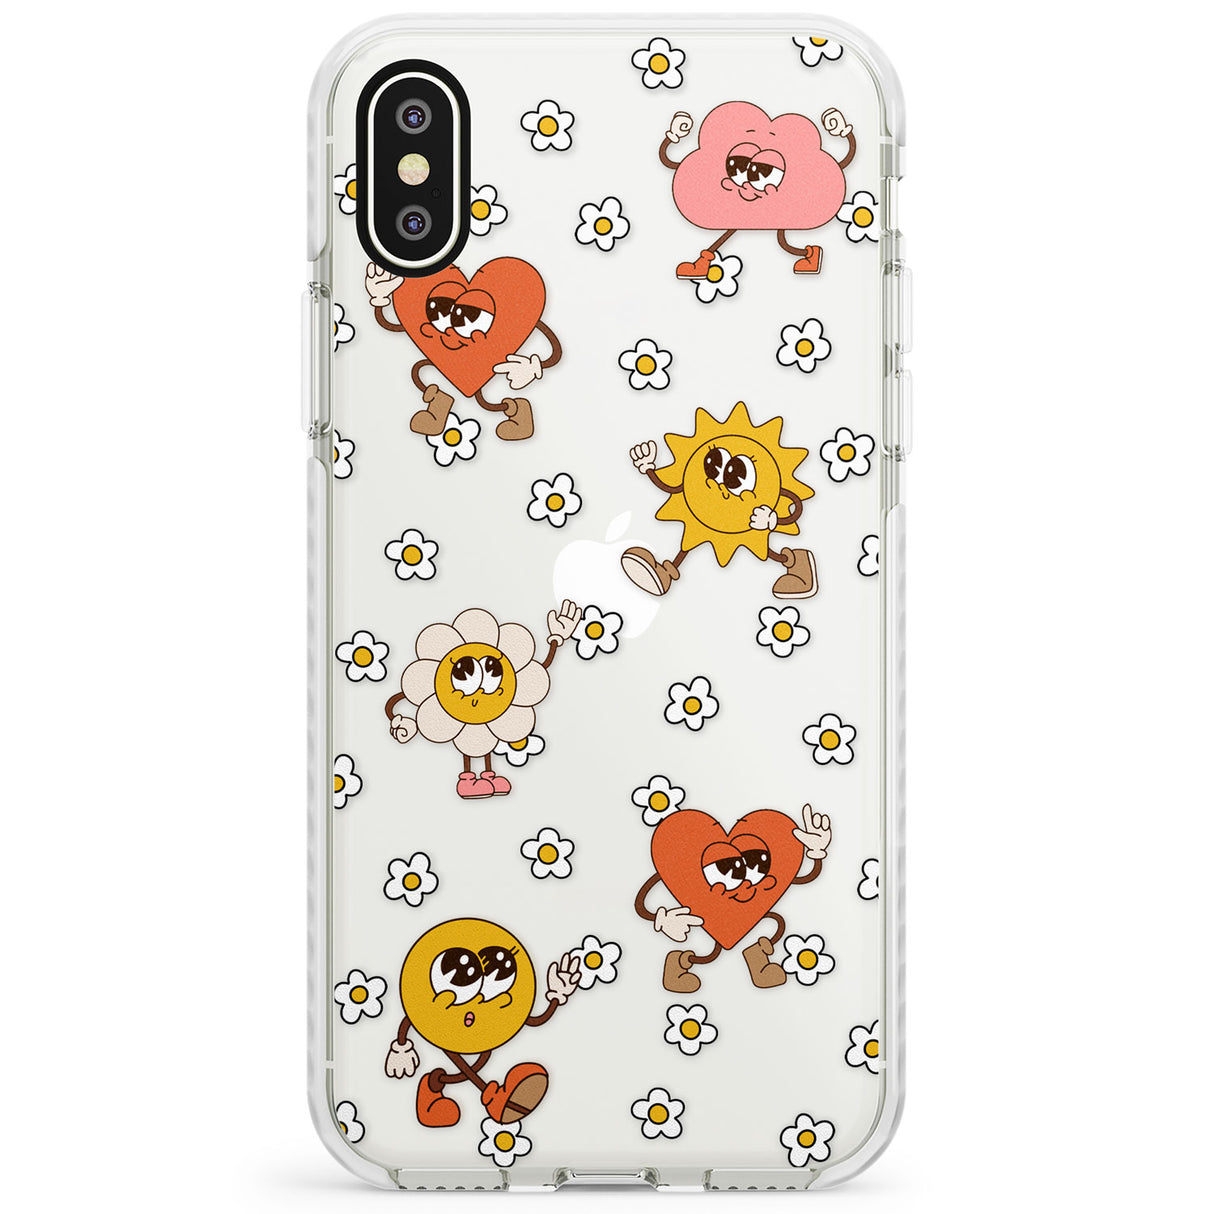 Daisies & Friends Impact Phone Case for iPhone X XS Max XR